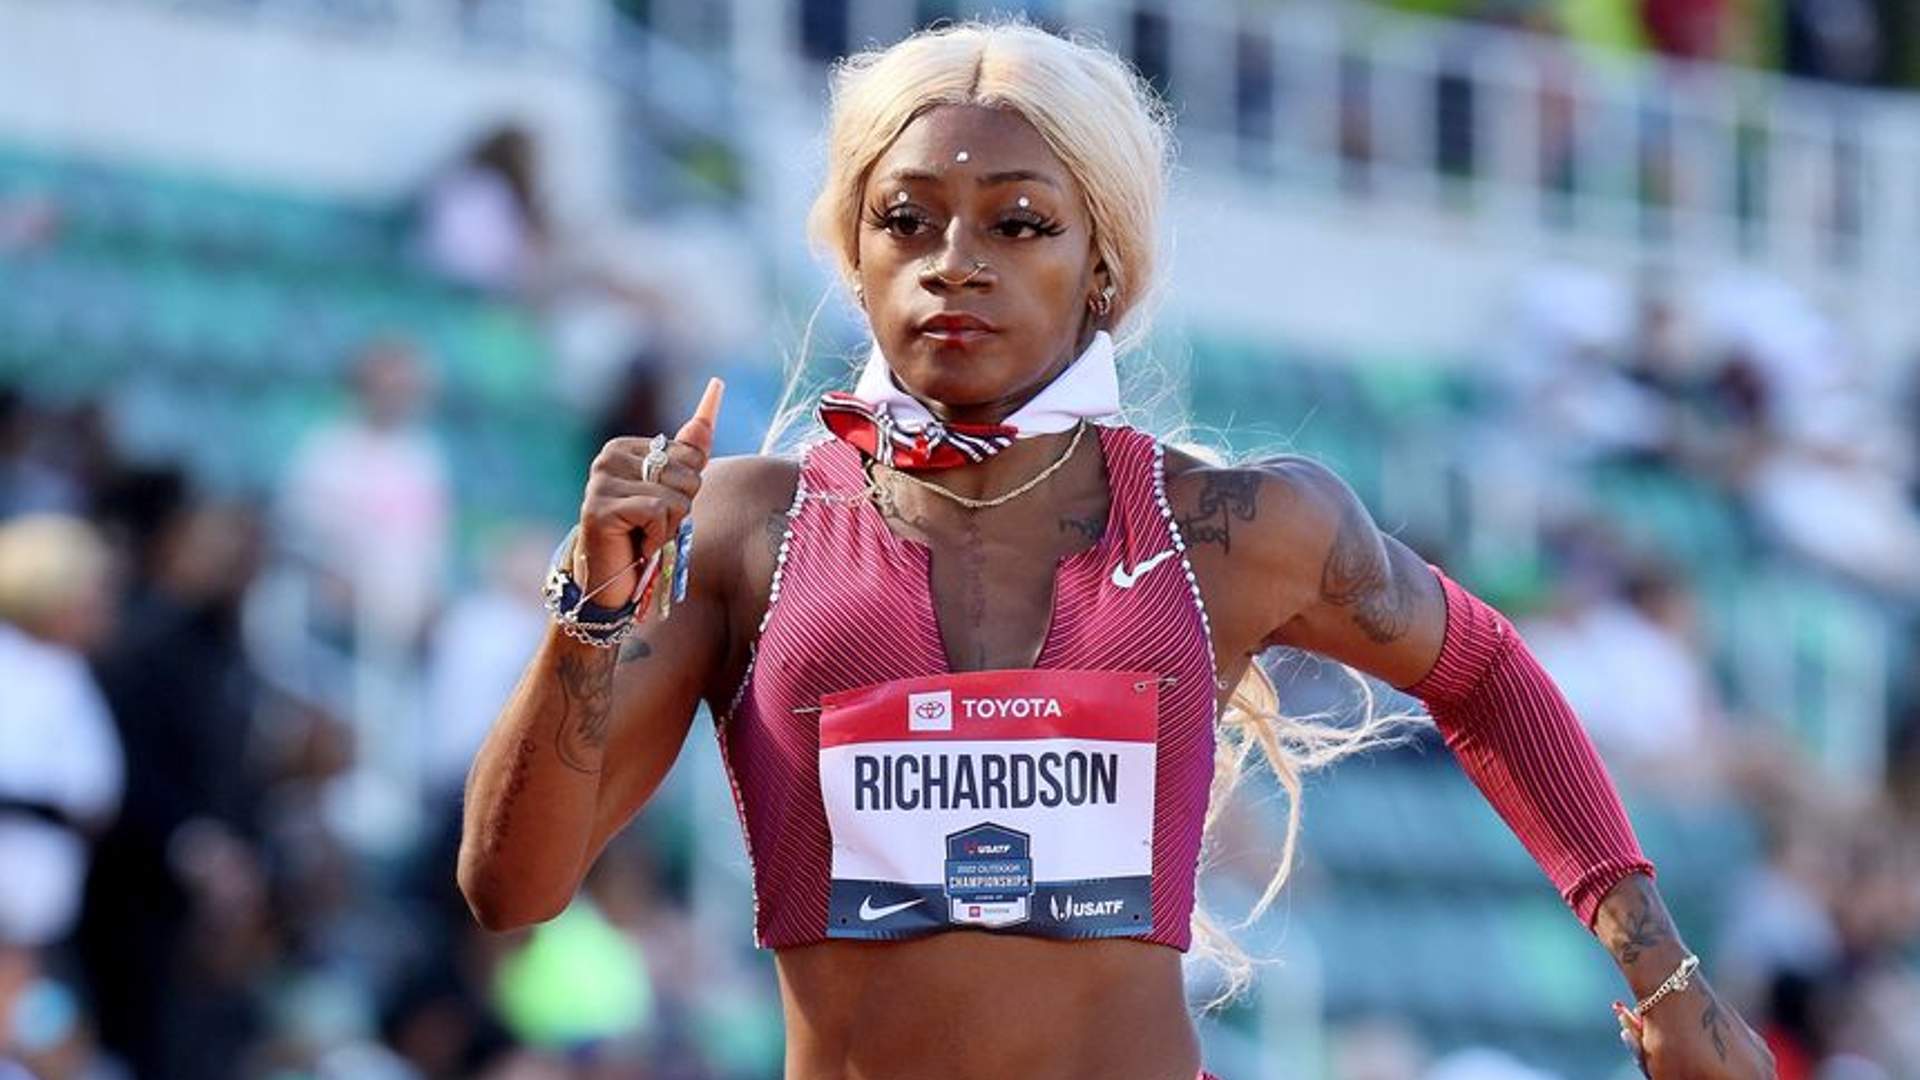 Sha'Carri Richardson running the 100 meters at the USA Track & Field championships 2022 (Image Credits - Twitter)